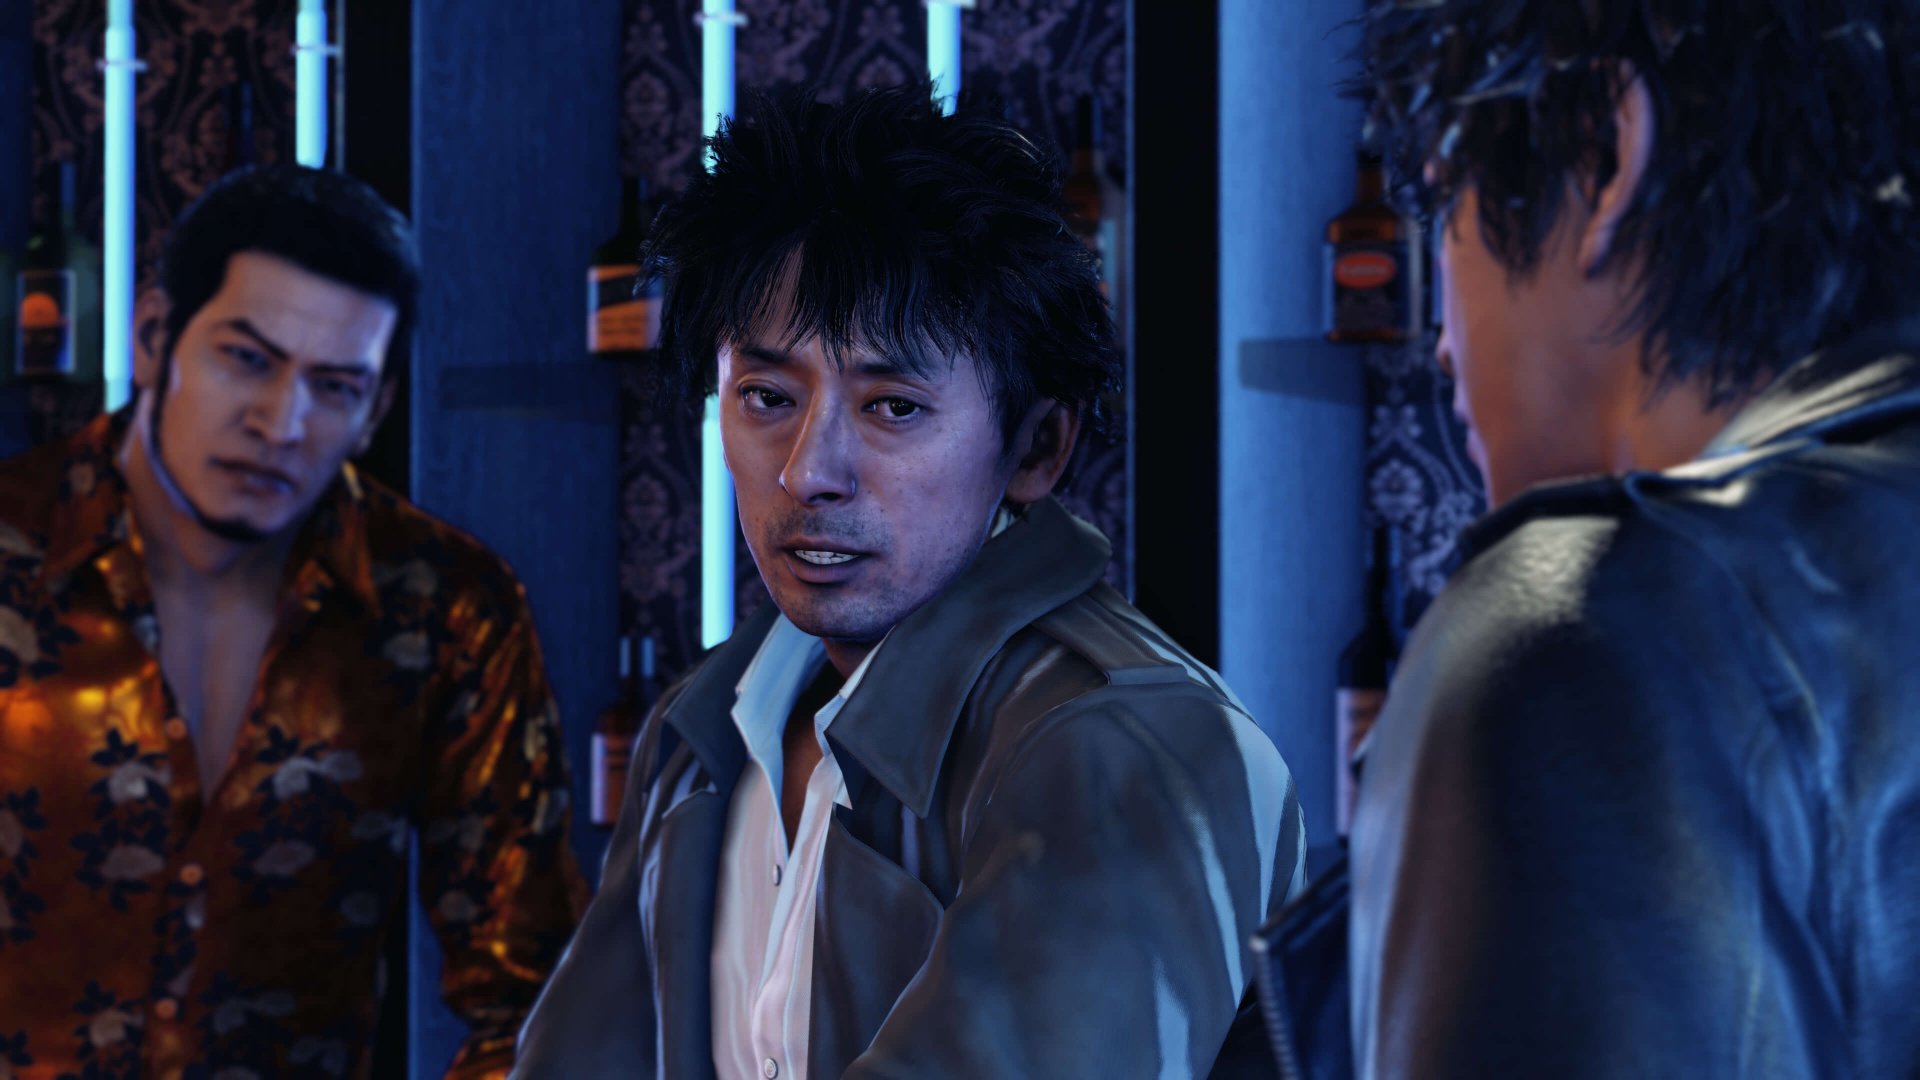 Judgment Review (PS5)